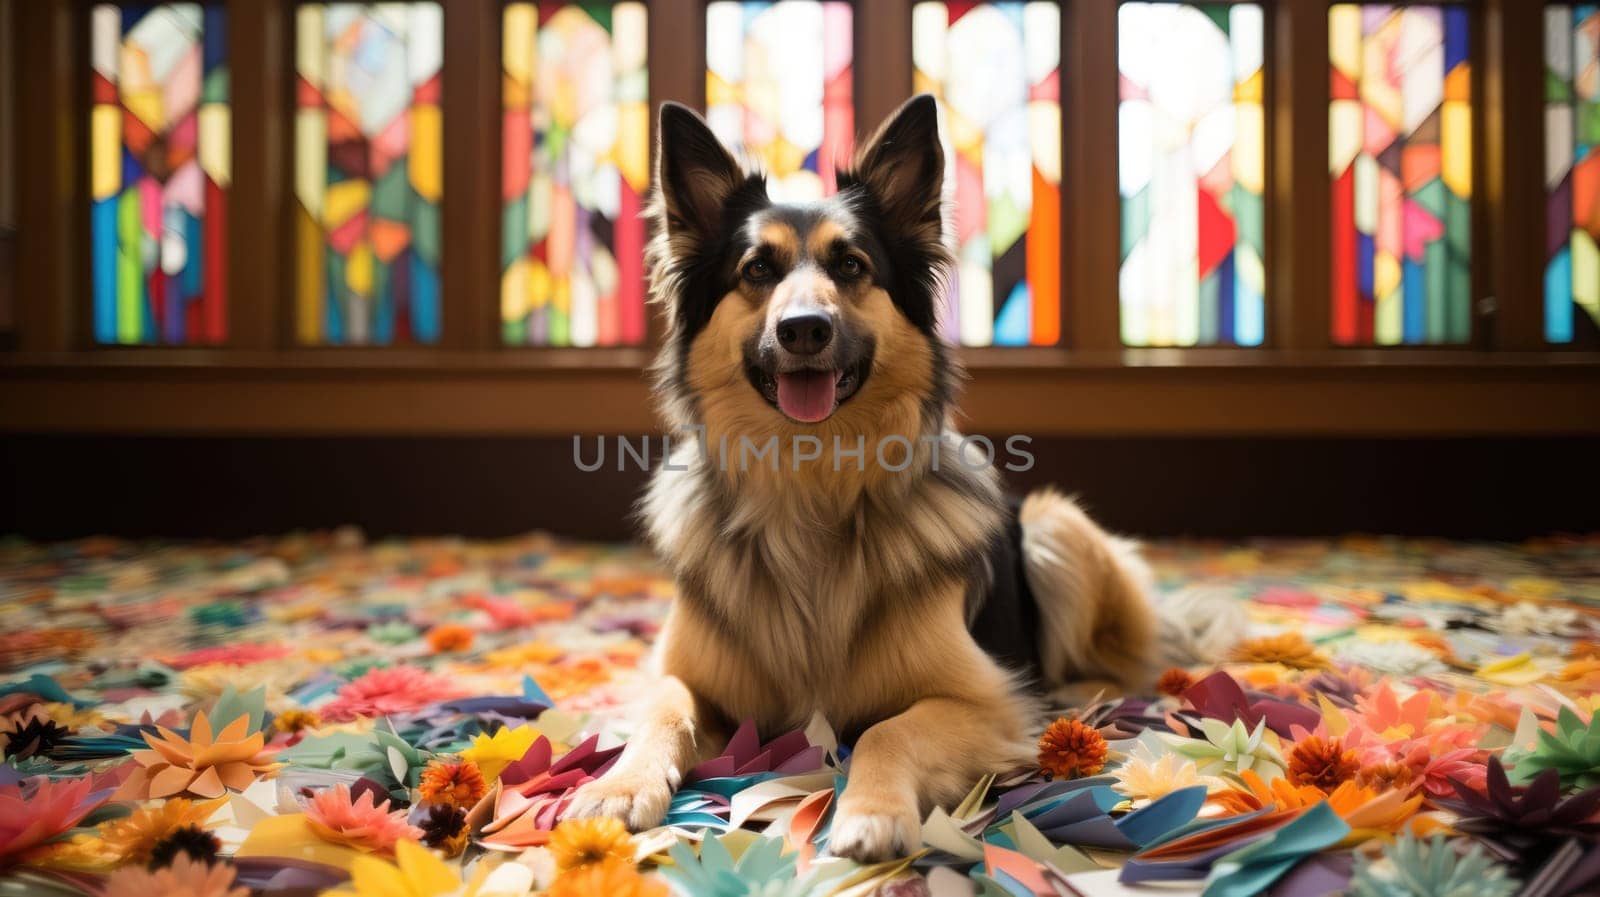 Lovely German shepherd dog with Valentine's day colorful paper flowers on the floor